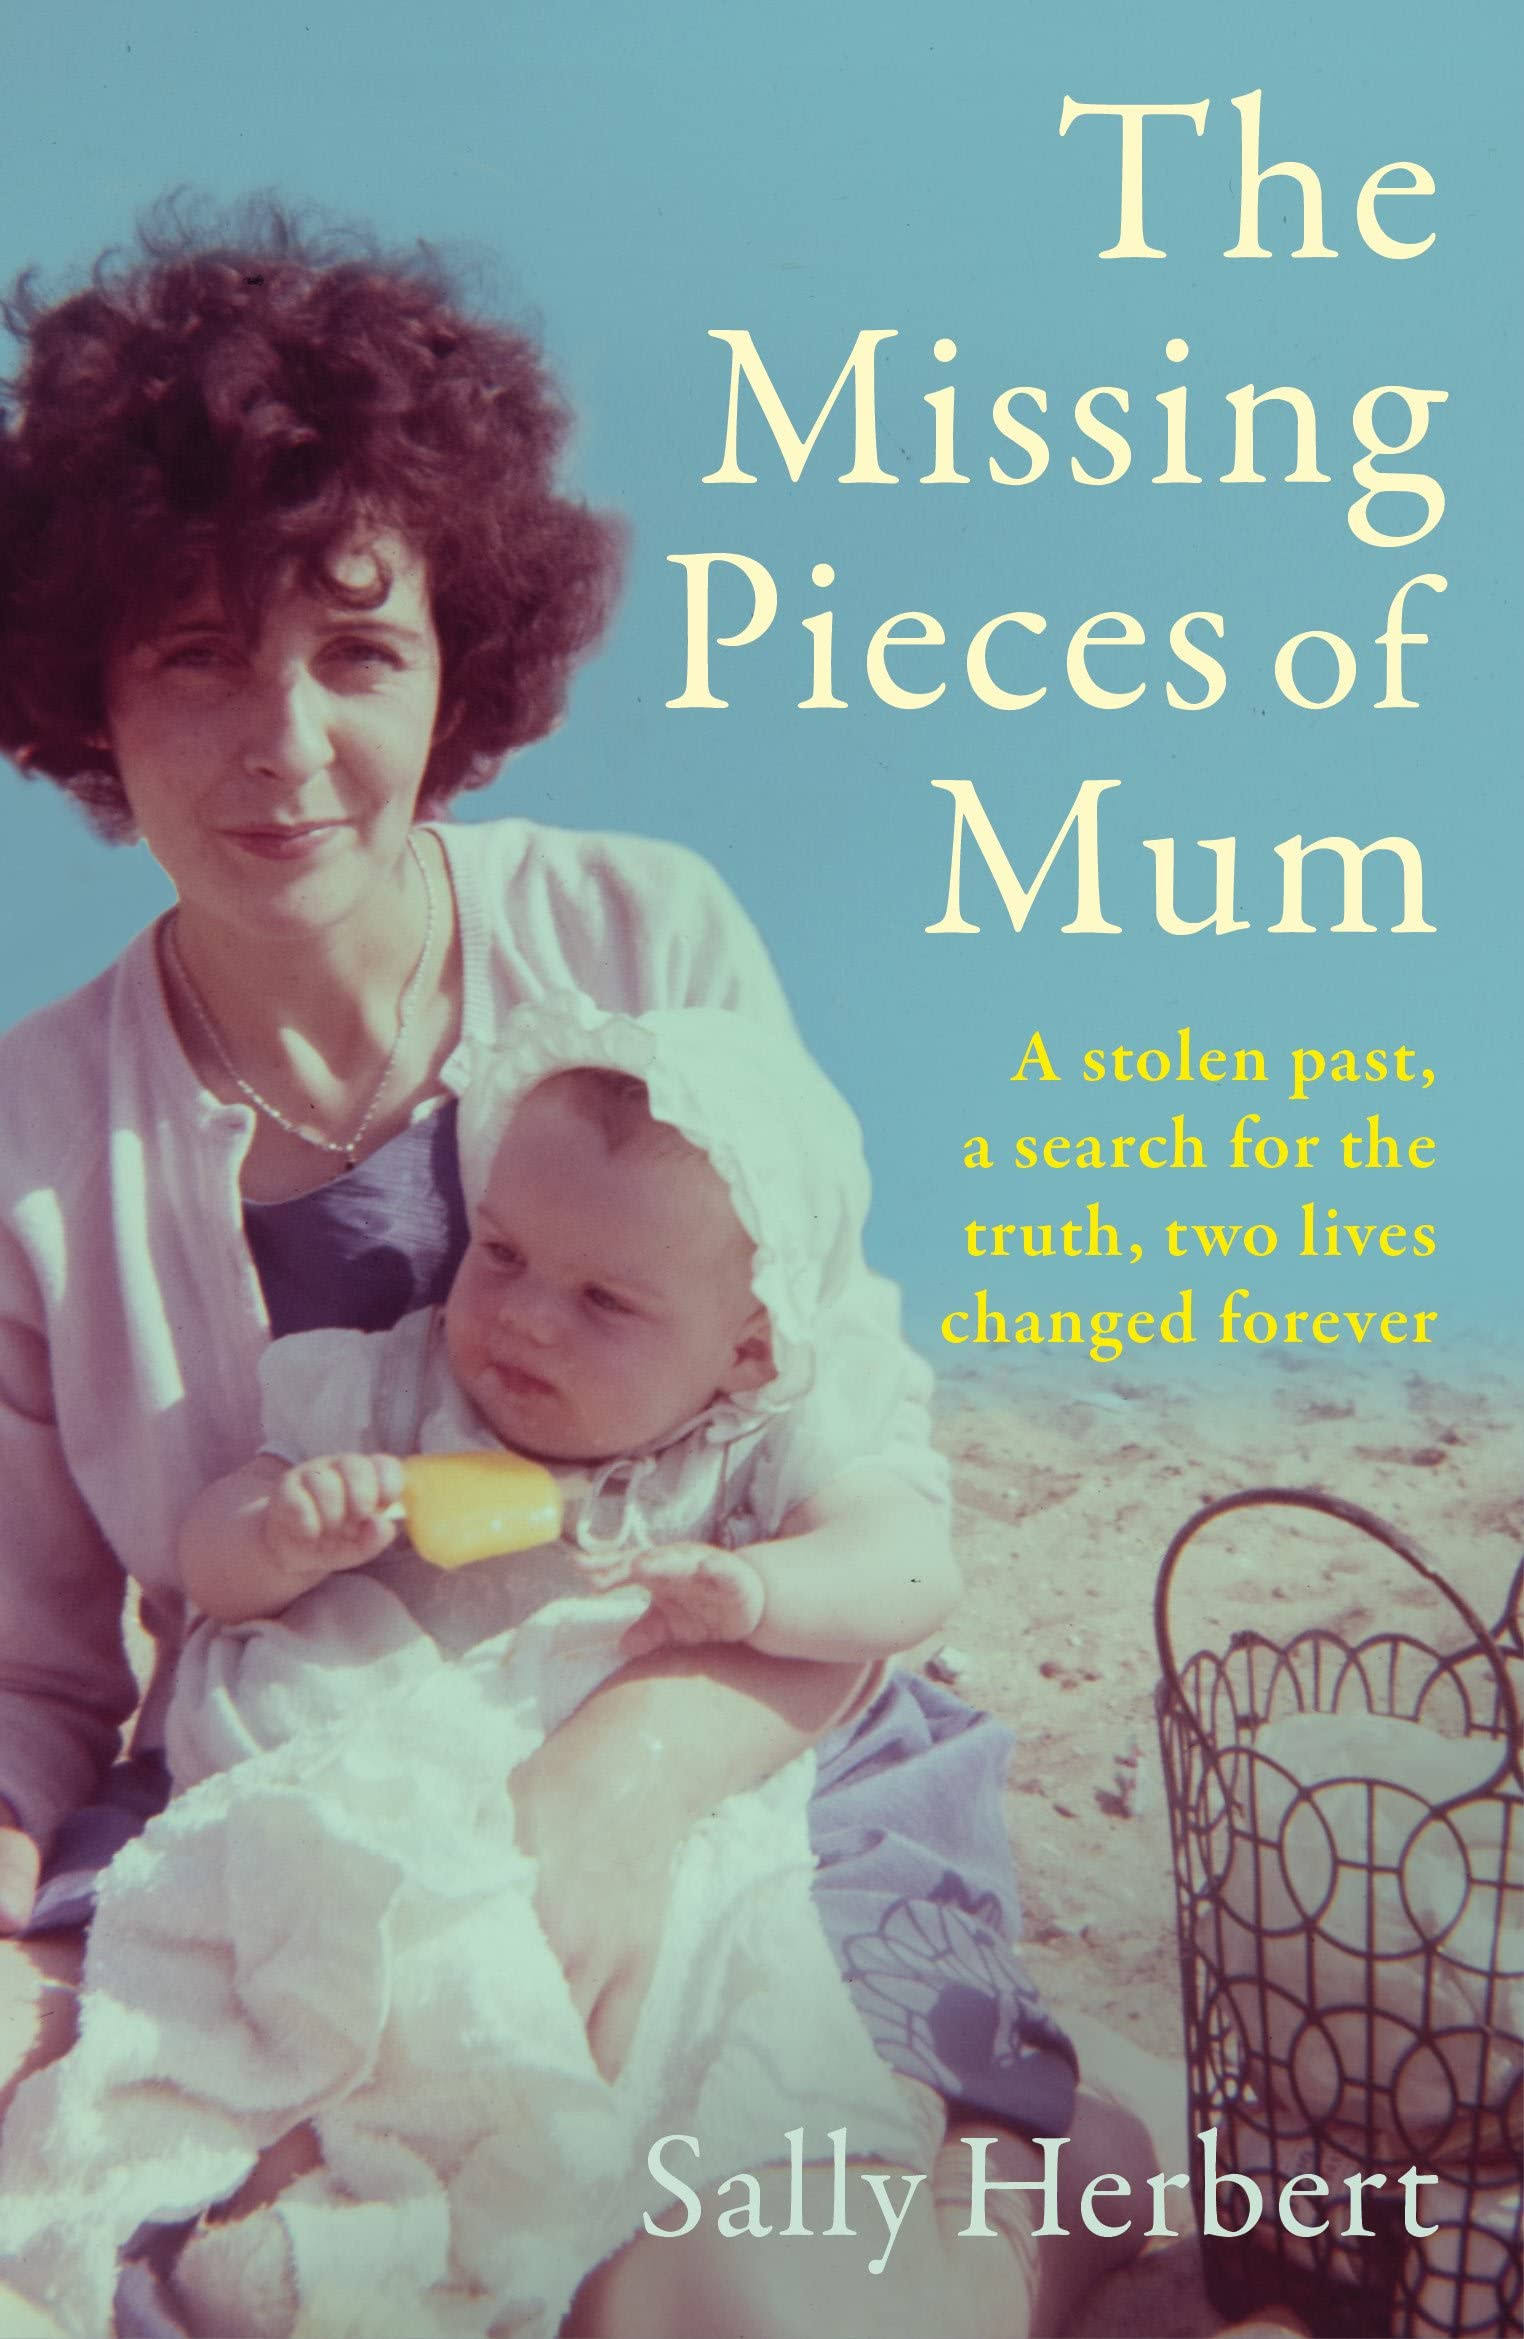 The Missing Pieces of Mum [Book]